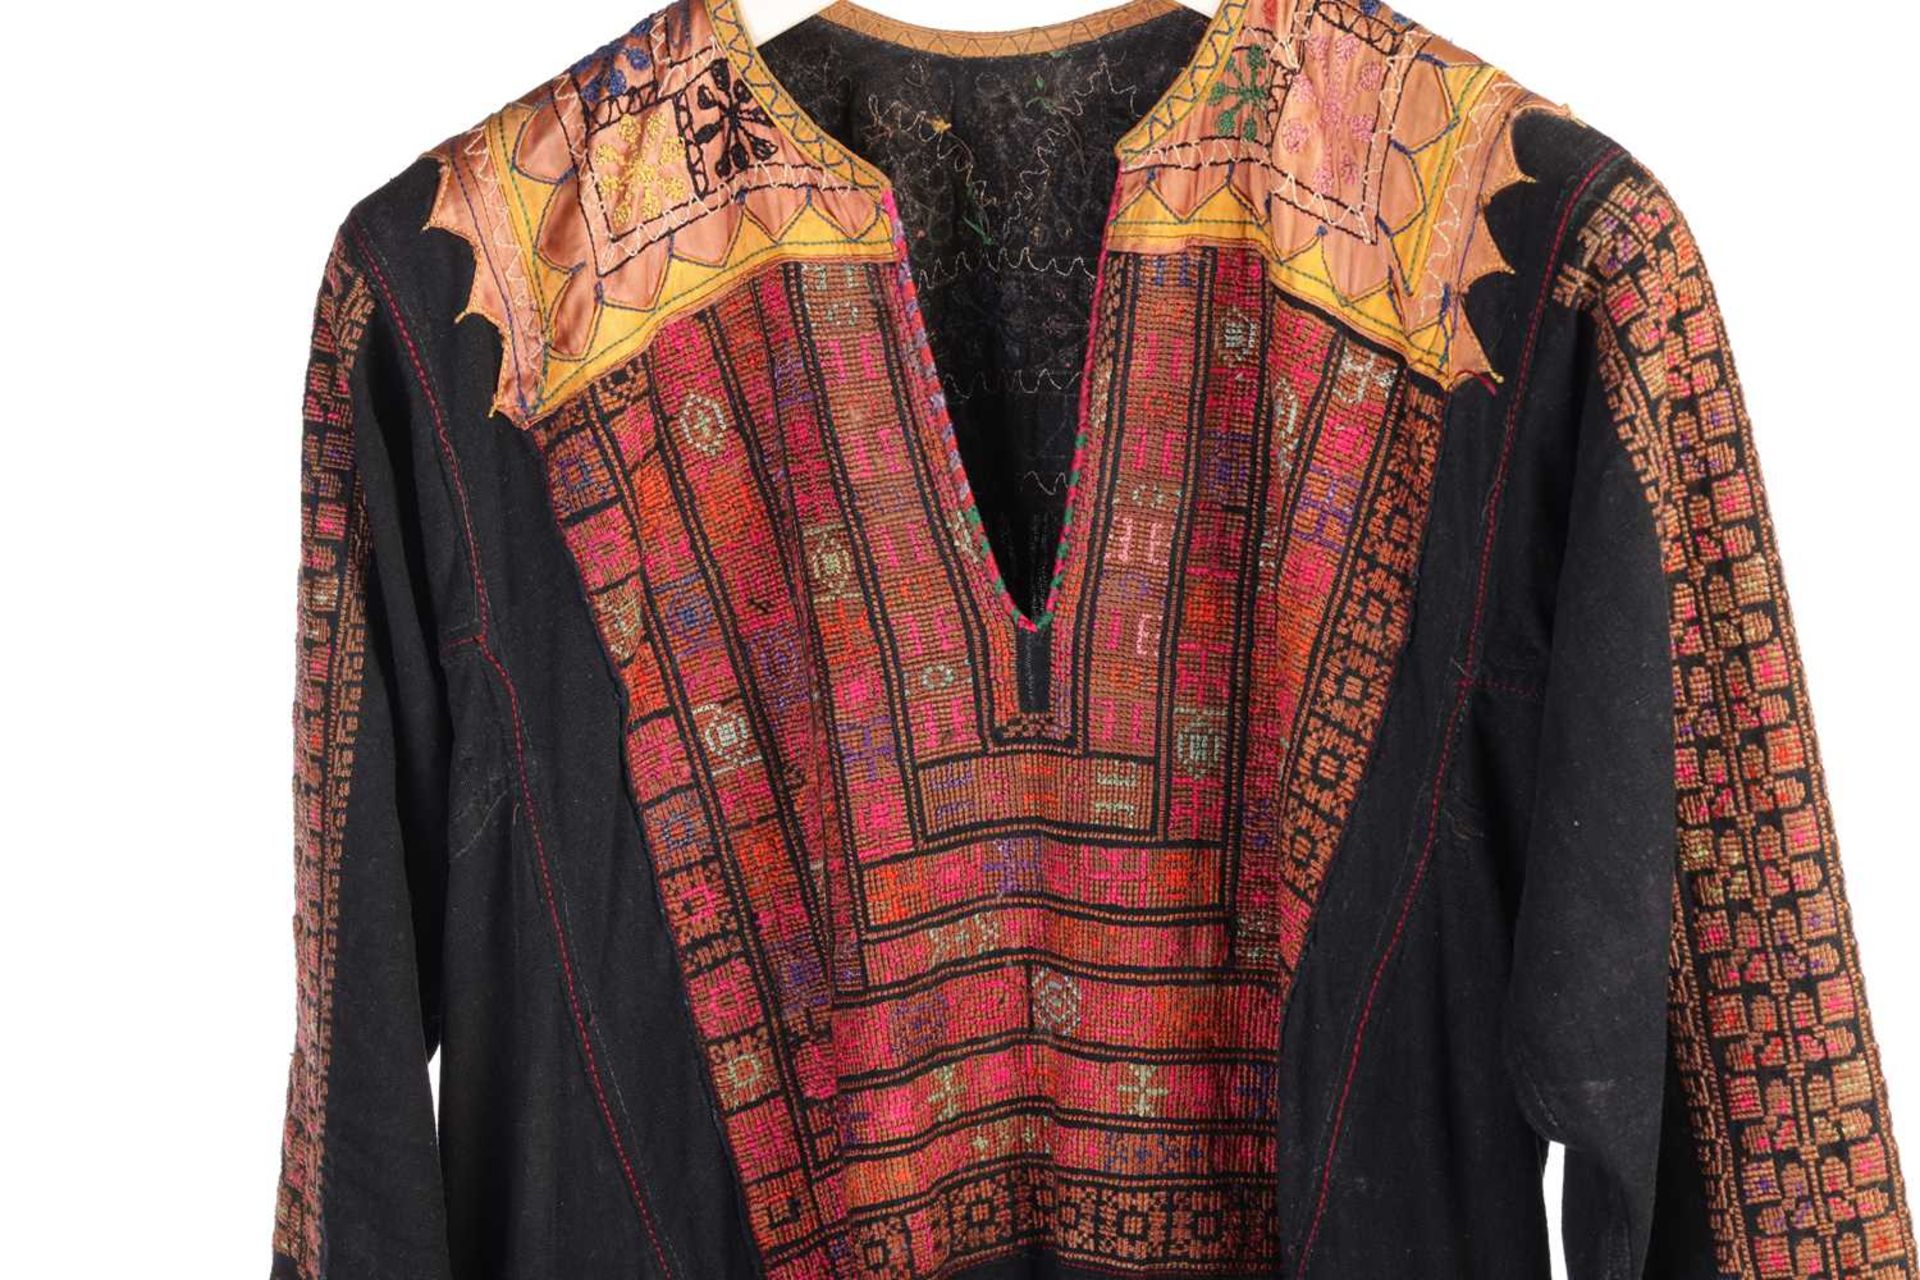 A Palestinian/Jordanian (?) lady's Thobe dress, with satin embellished shoulders and panels of geome - Image 5 of 10